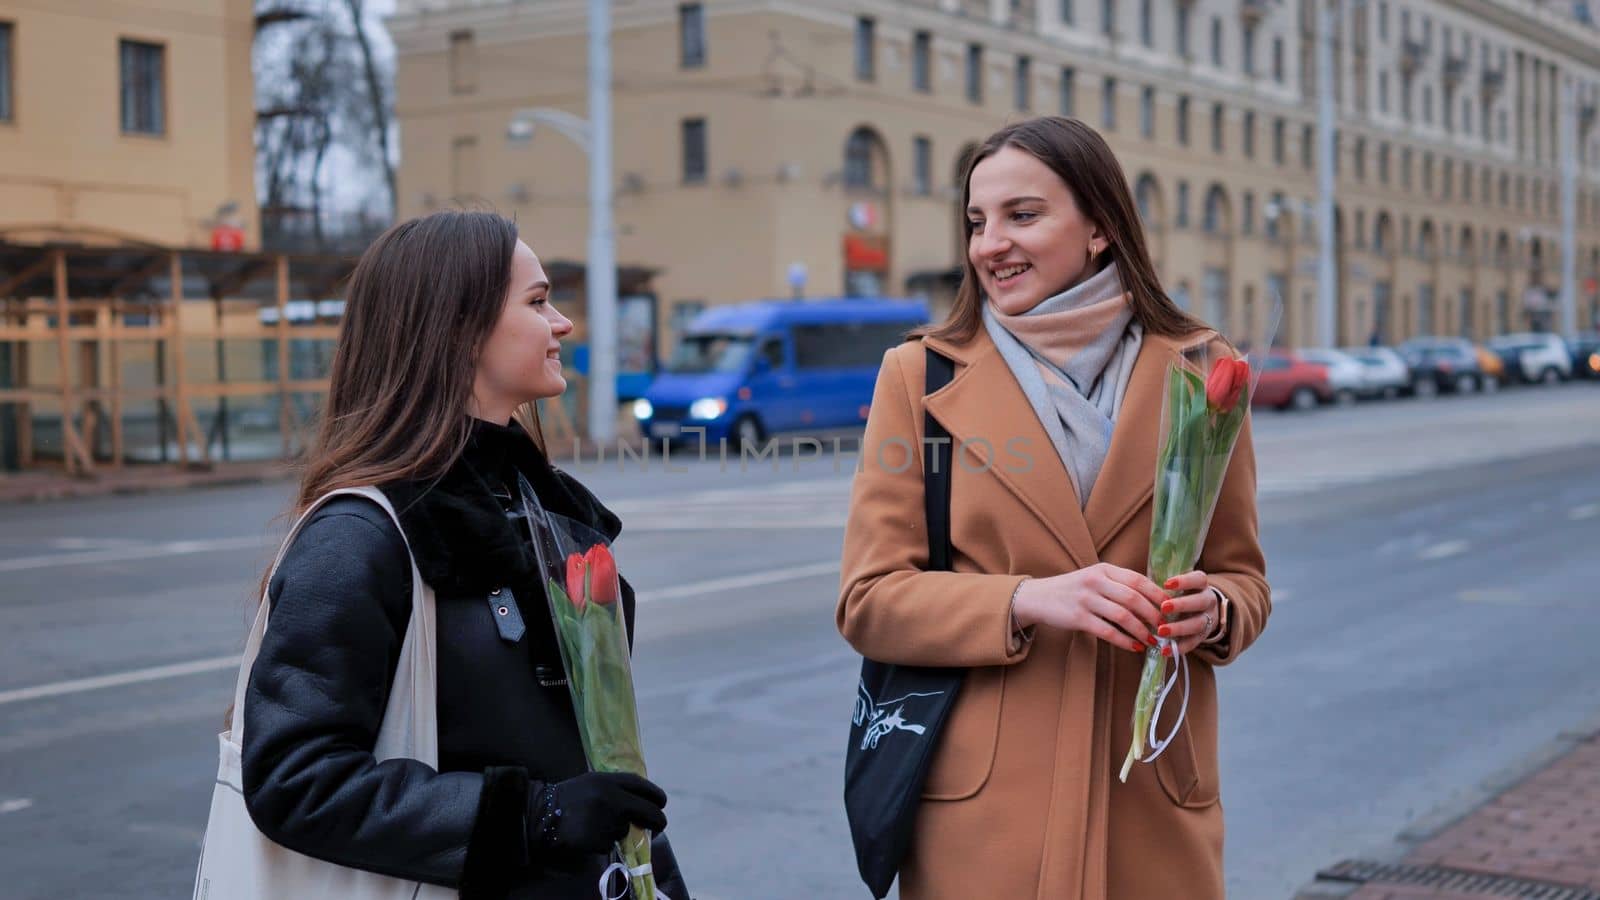 Two cheerful girlfriends say goodbye to each other on a city street. by DovidPro